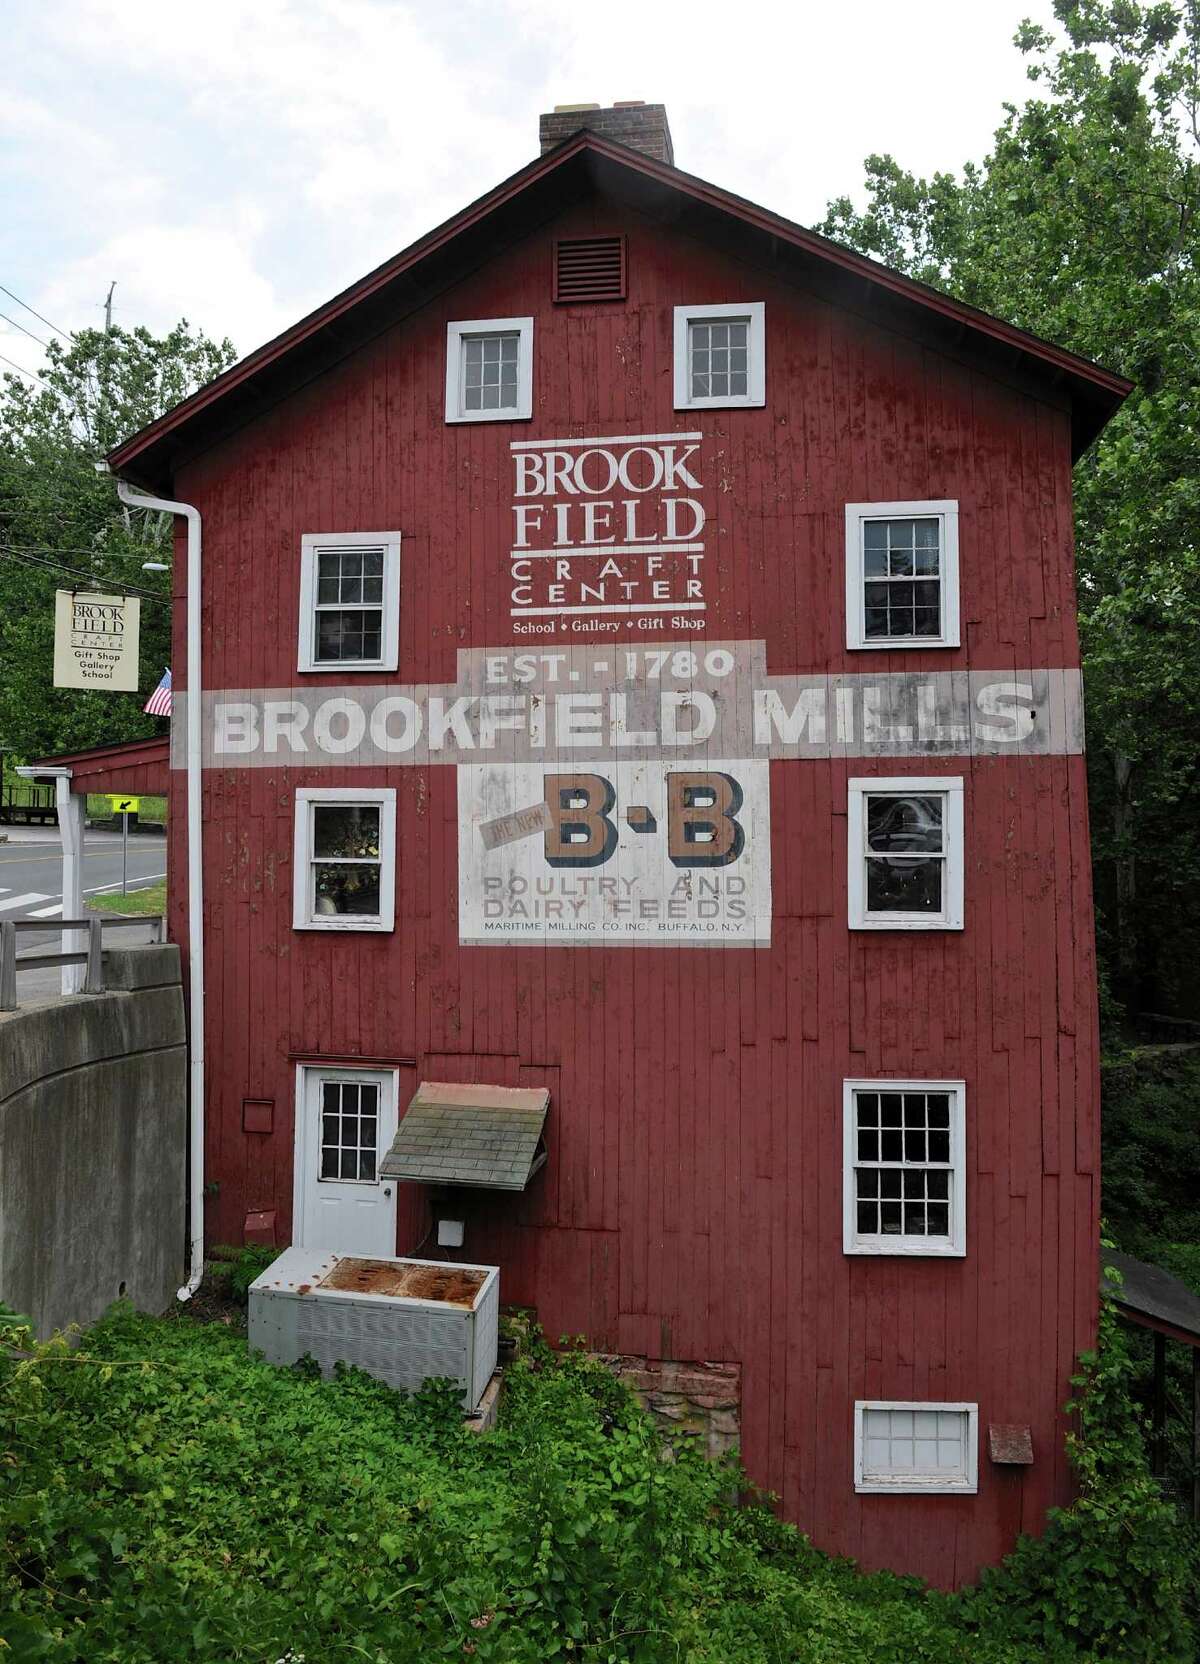 The Brookfield Crafts Center. Wednesday, July 13, 2016, in Brookfield, Conn.